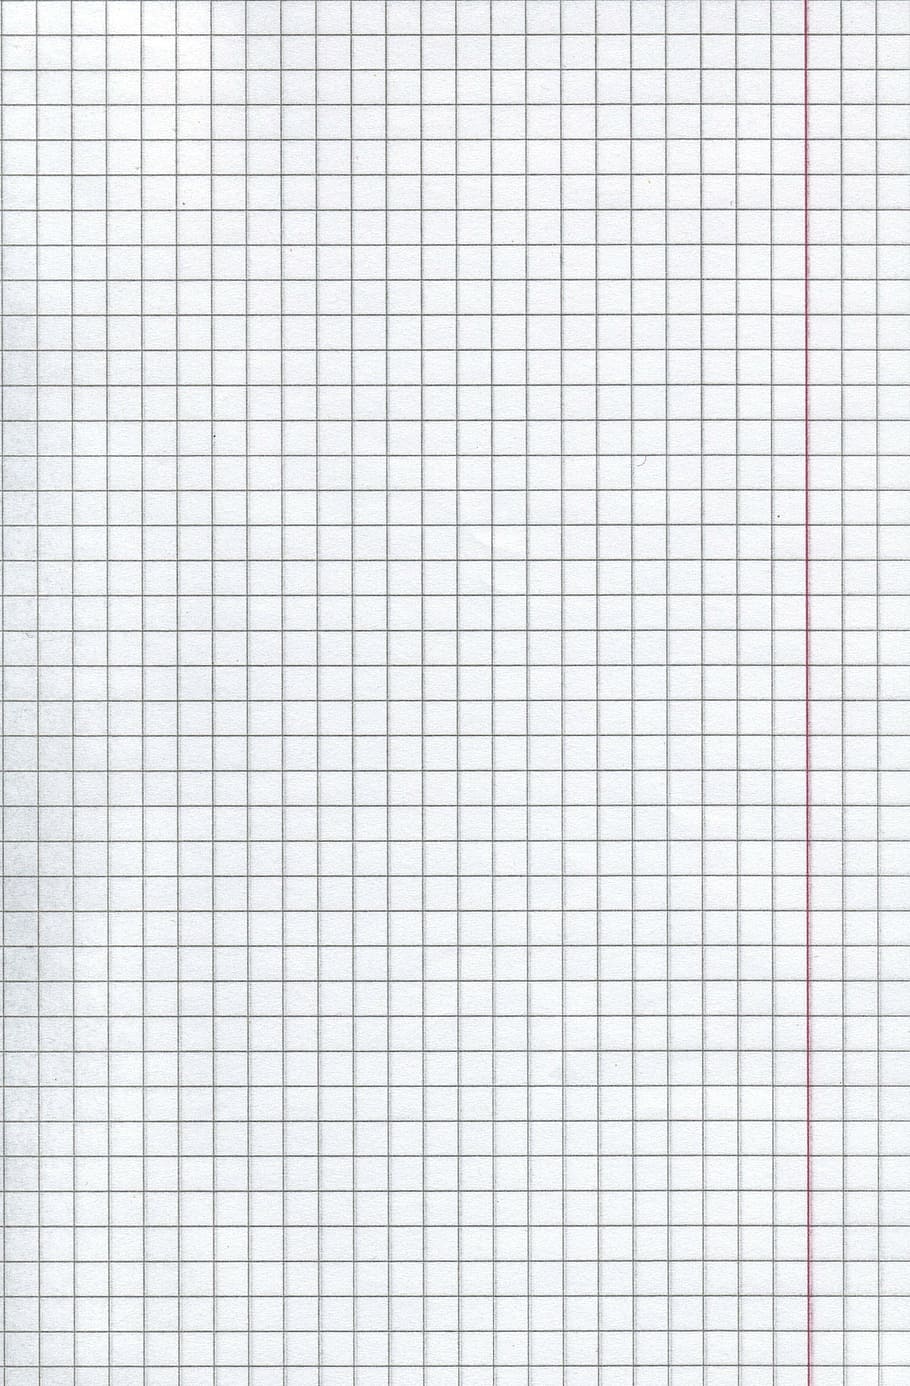 white graphing paper, grid paper, paper, school, science, texture, backgrounds, vector, page, note pad